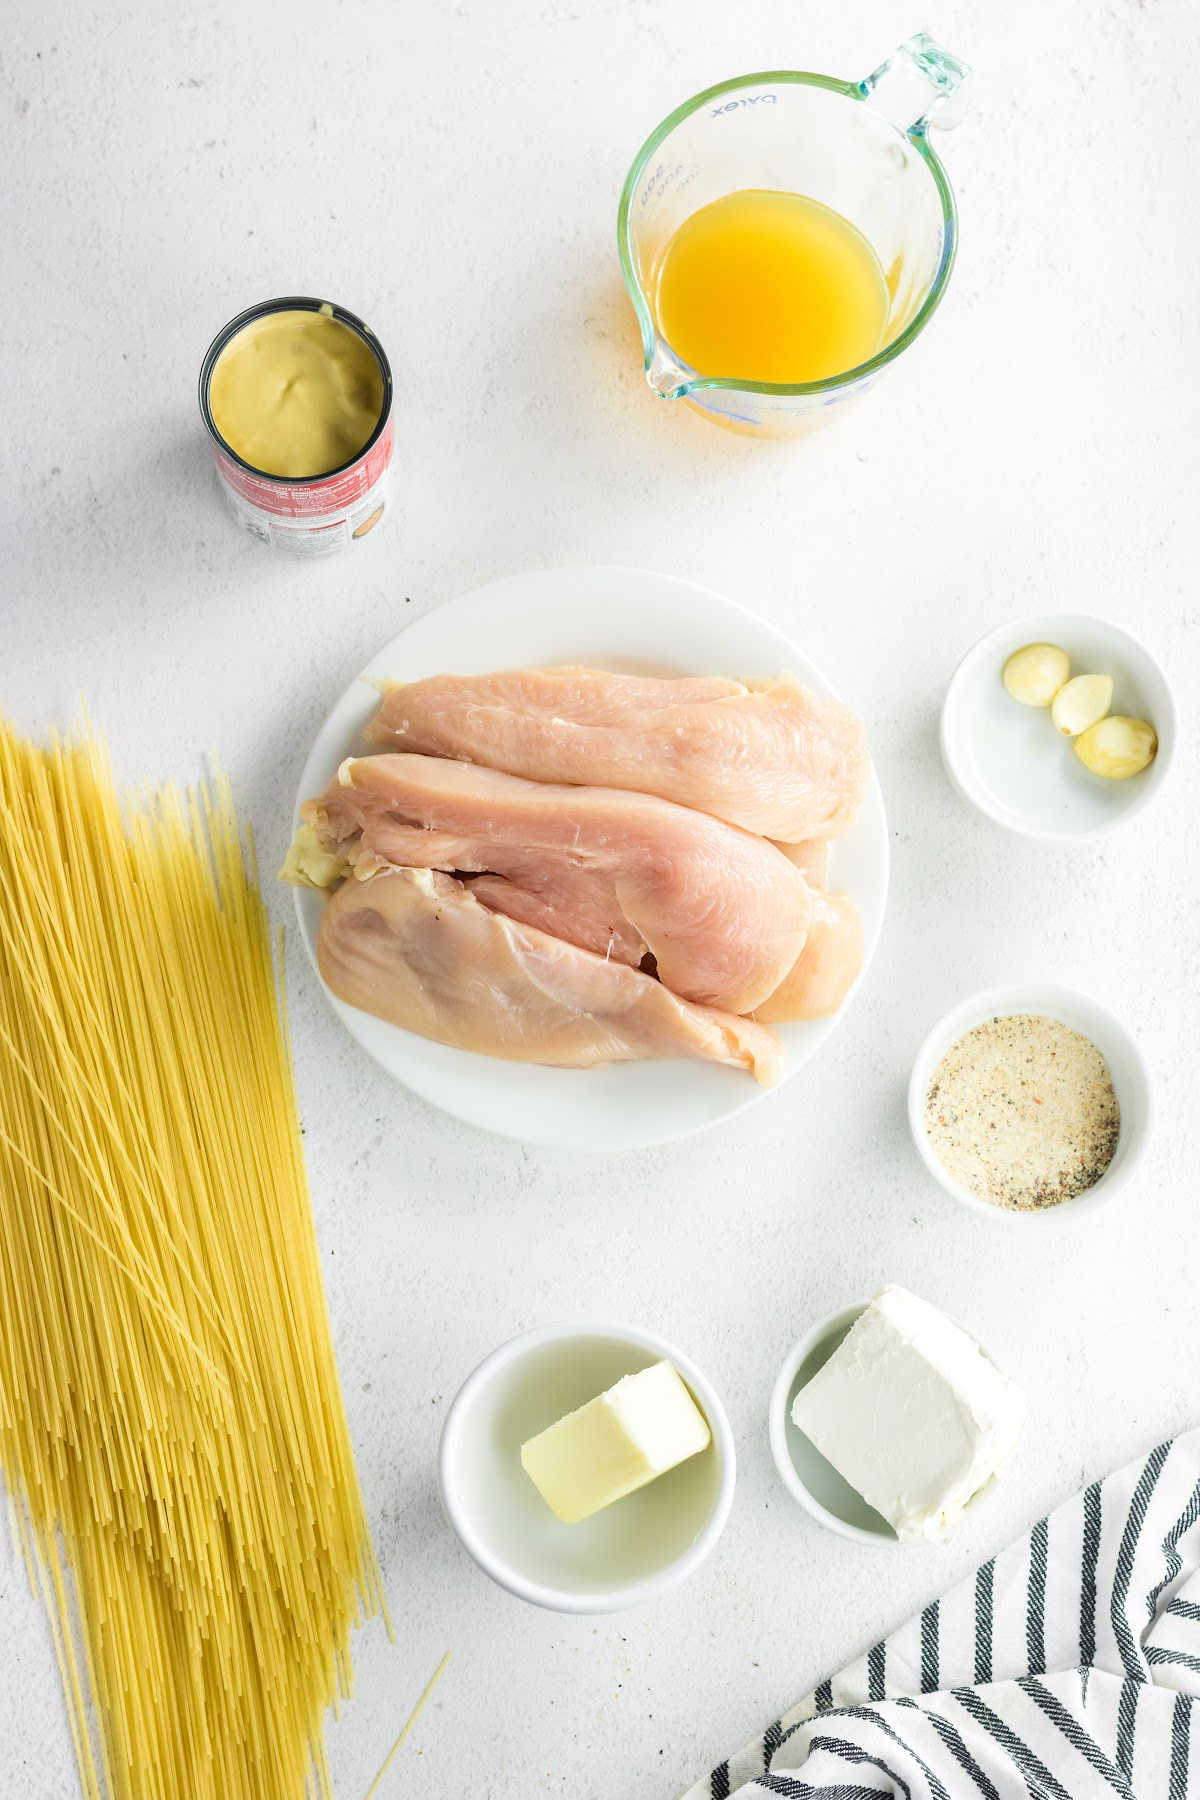 Angel Hair Pasta with Chicken Recipe: How to Make It